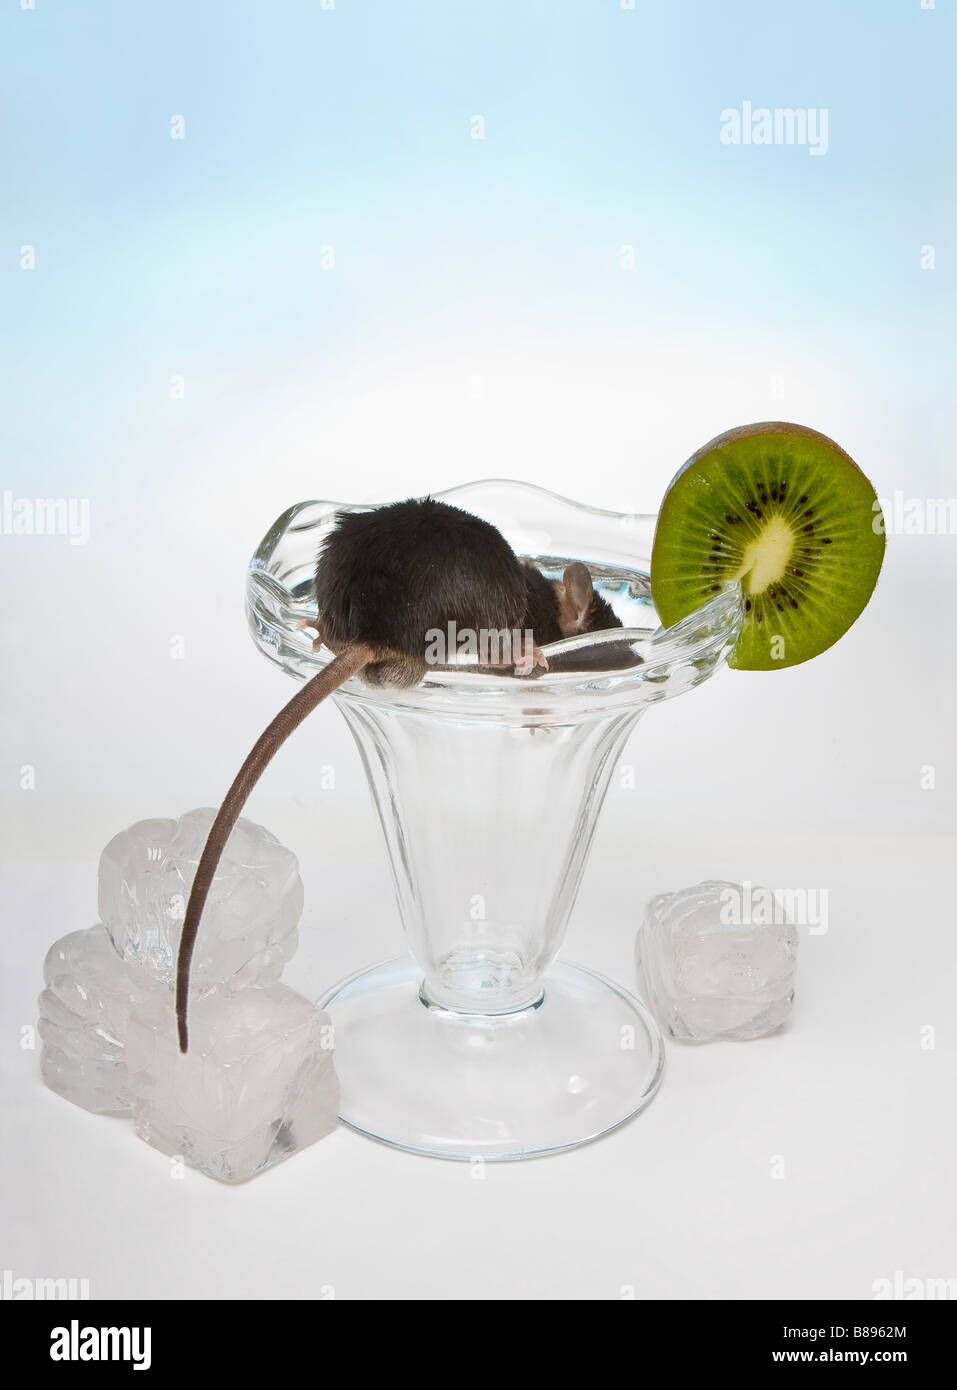 Little brown mouse preparing a cocktail glass Stock Photo